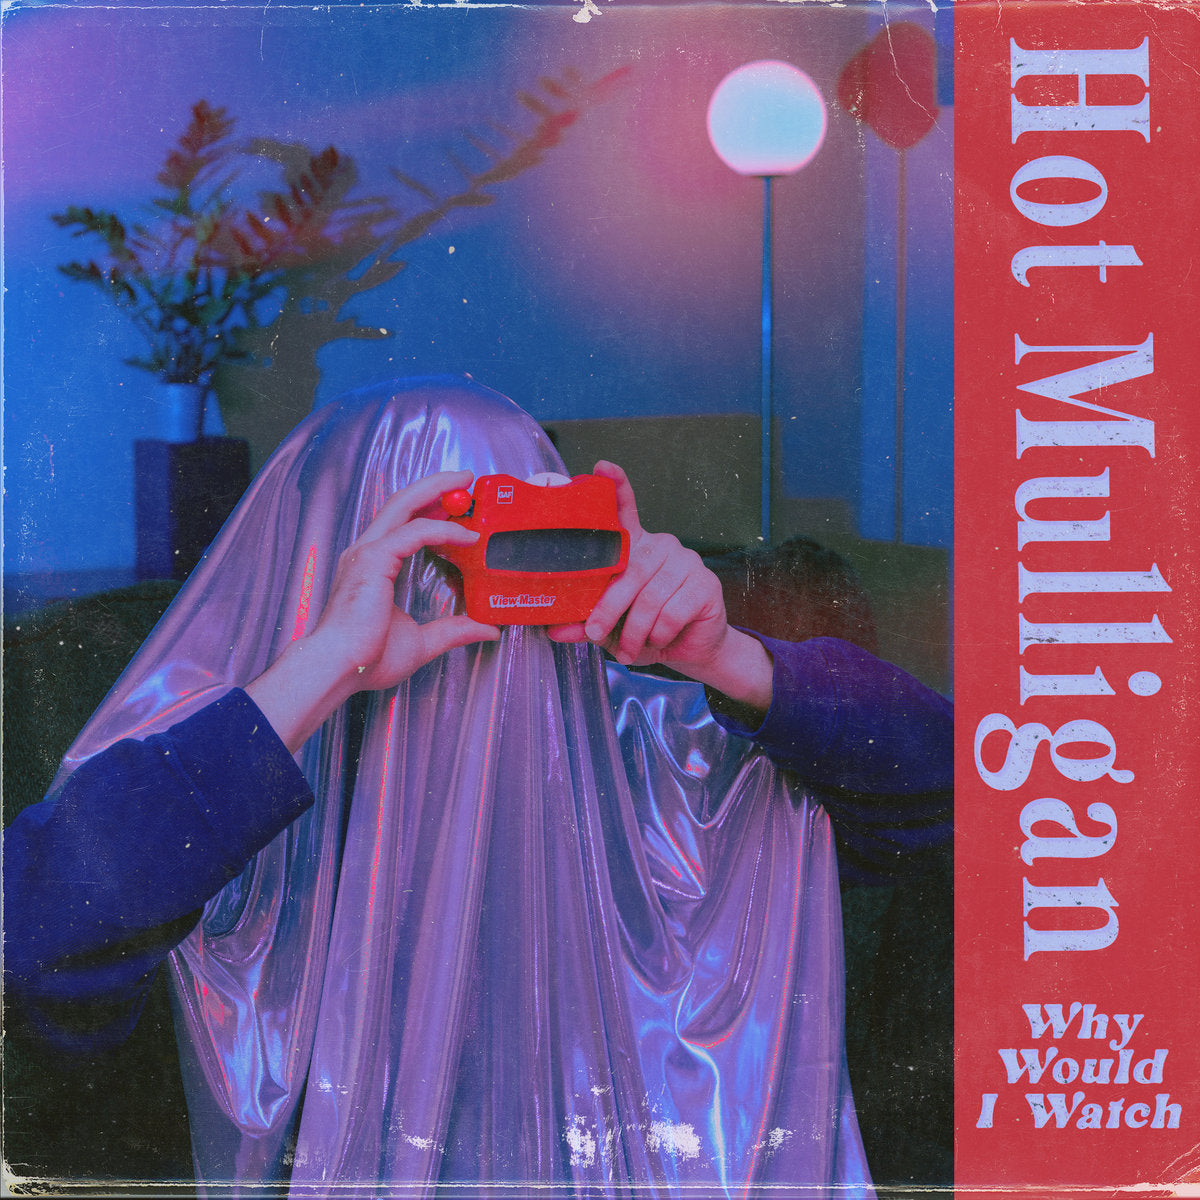 Hot Mulligan "Why Would I Watch" CD